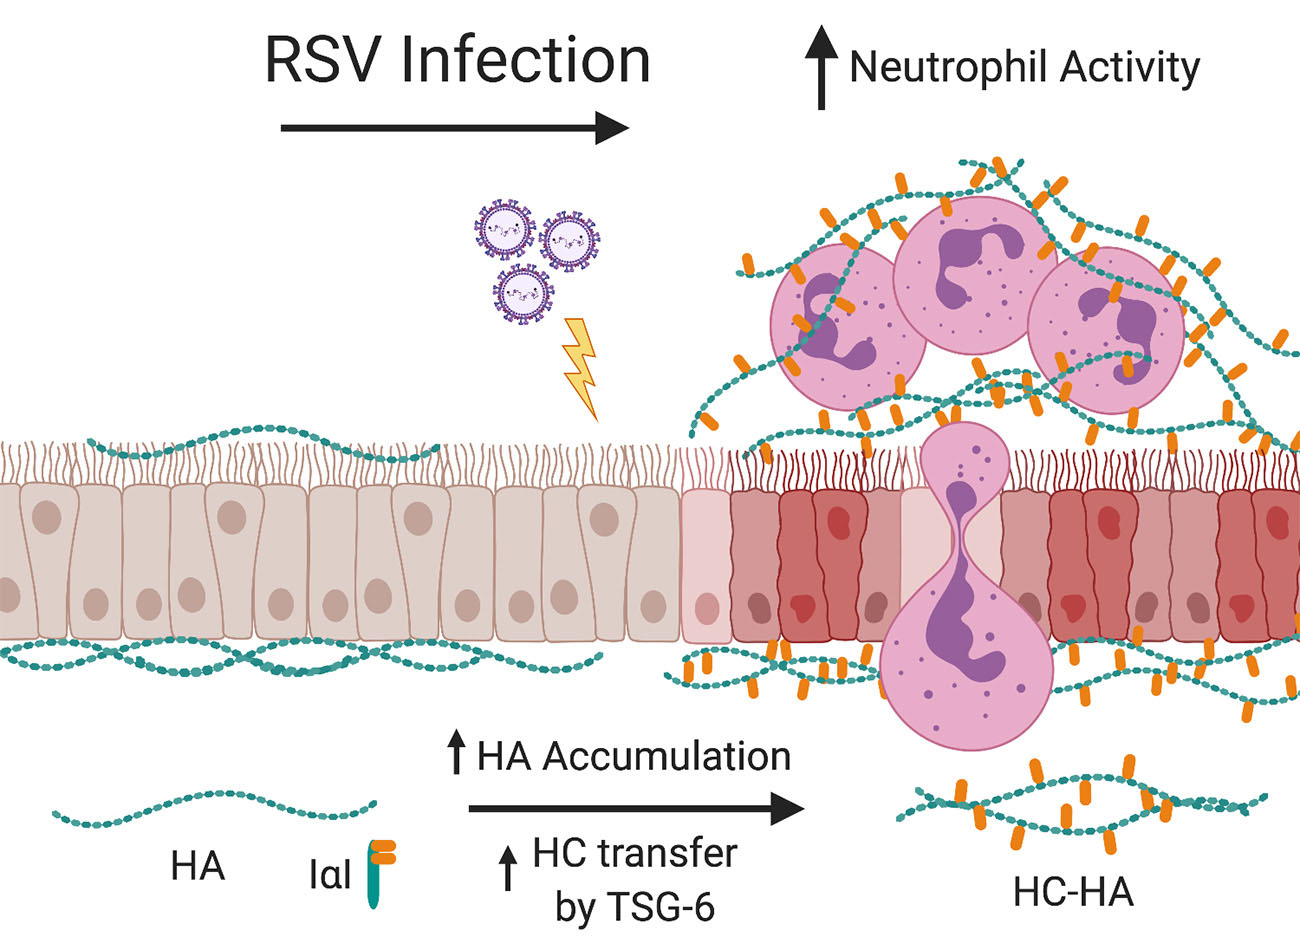 Infographic regarding RSV infection and neutrophil activity